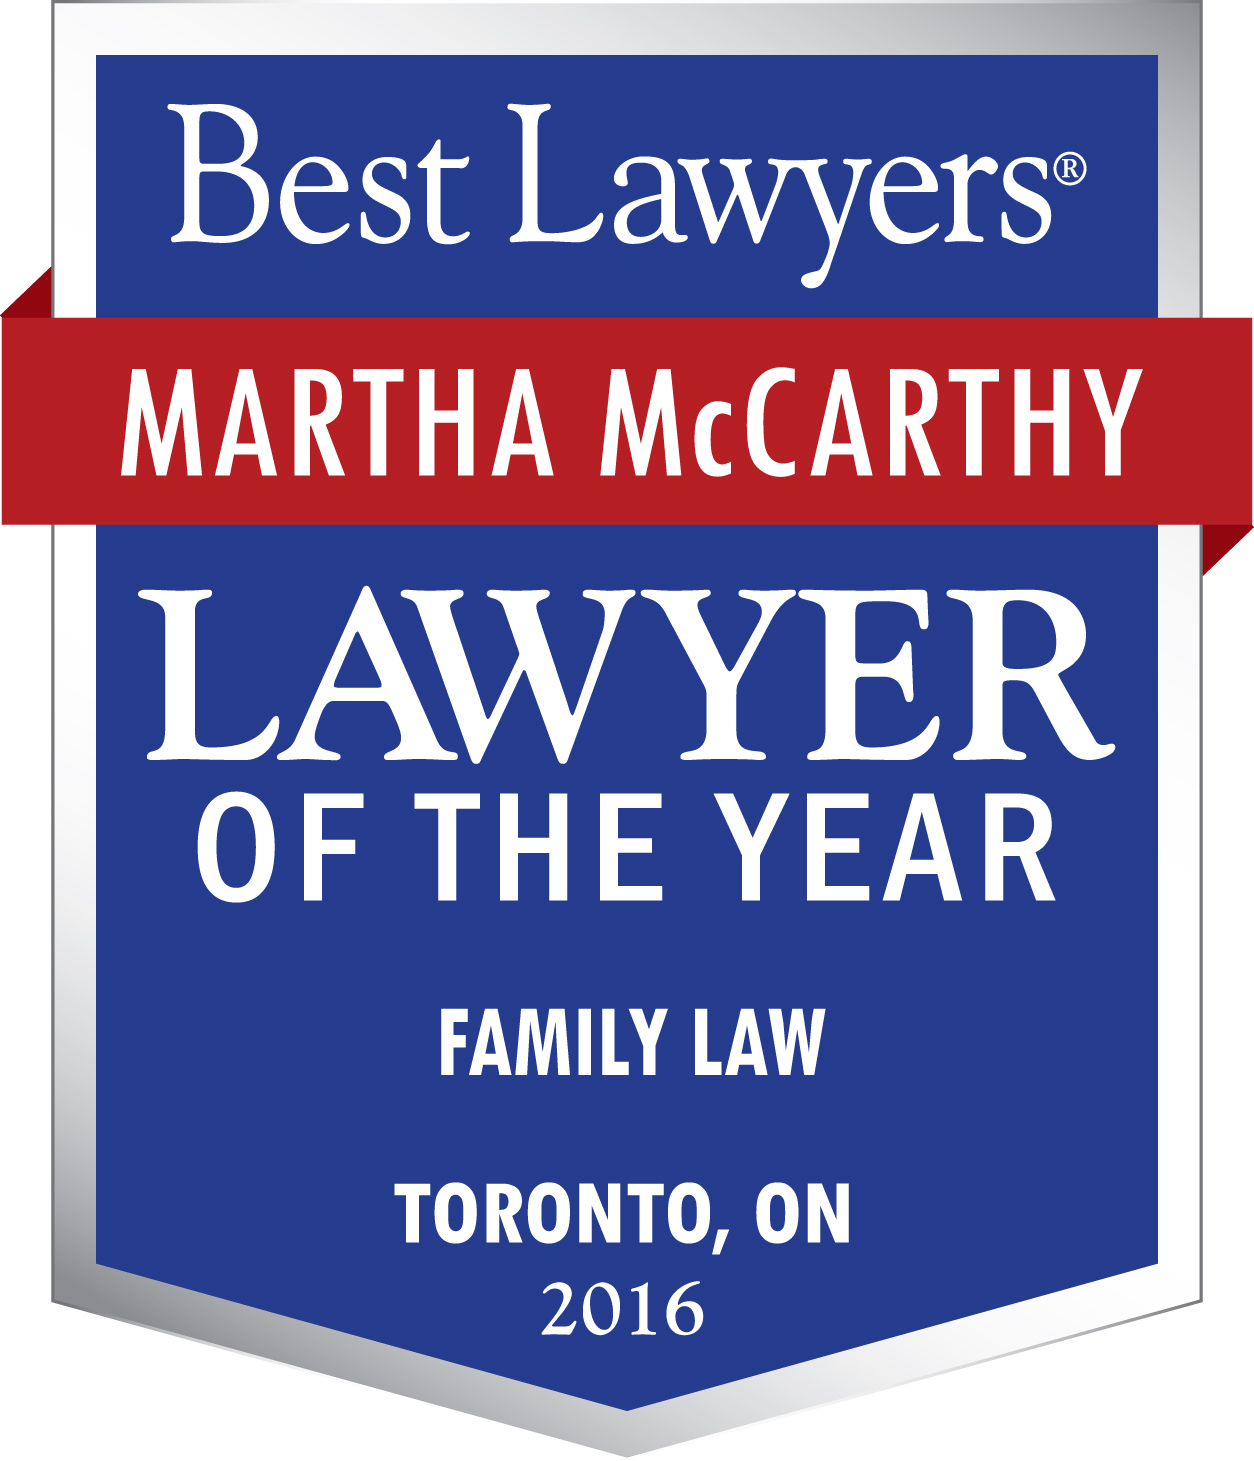 Martha McCarthy included in the 10th Edition of The Best Lawyers in Canada in Family Law and also being named the Best Lawyers’ 2016 Toronto Family Law “Lawyer of the Year”